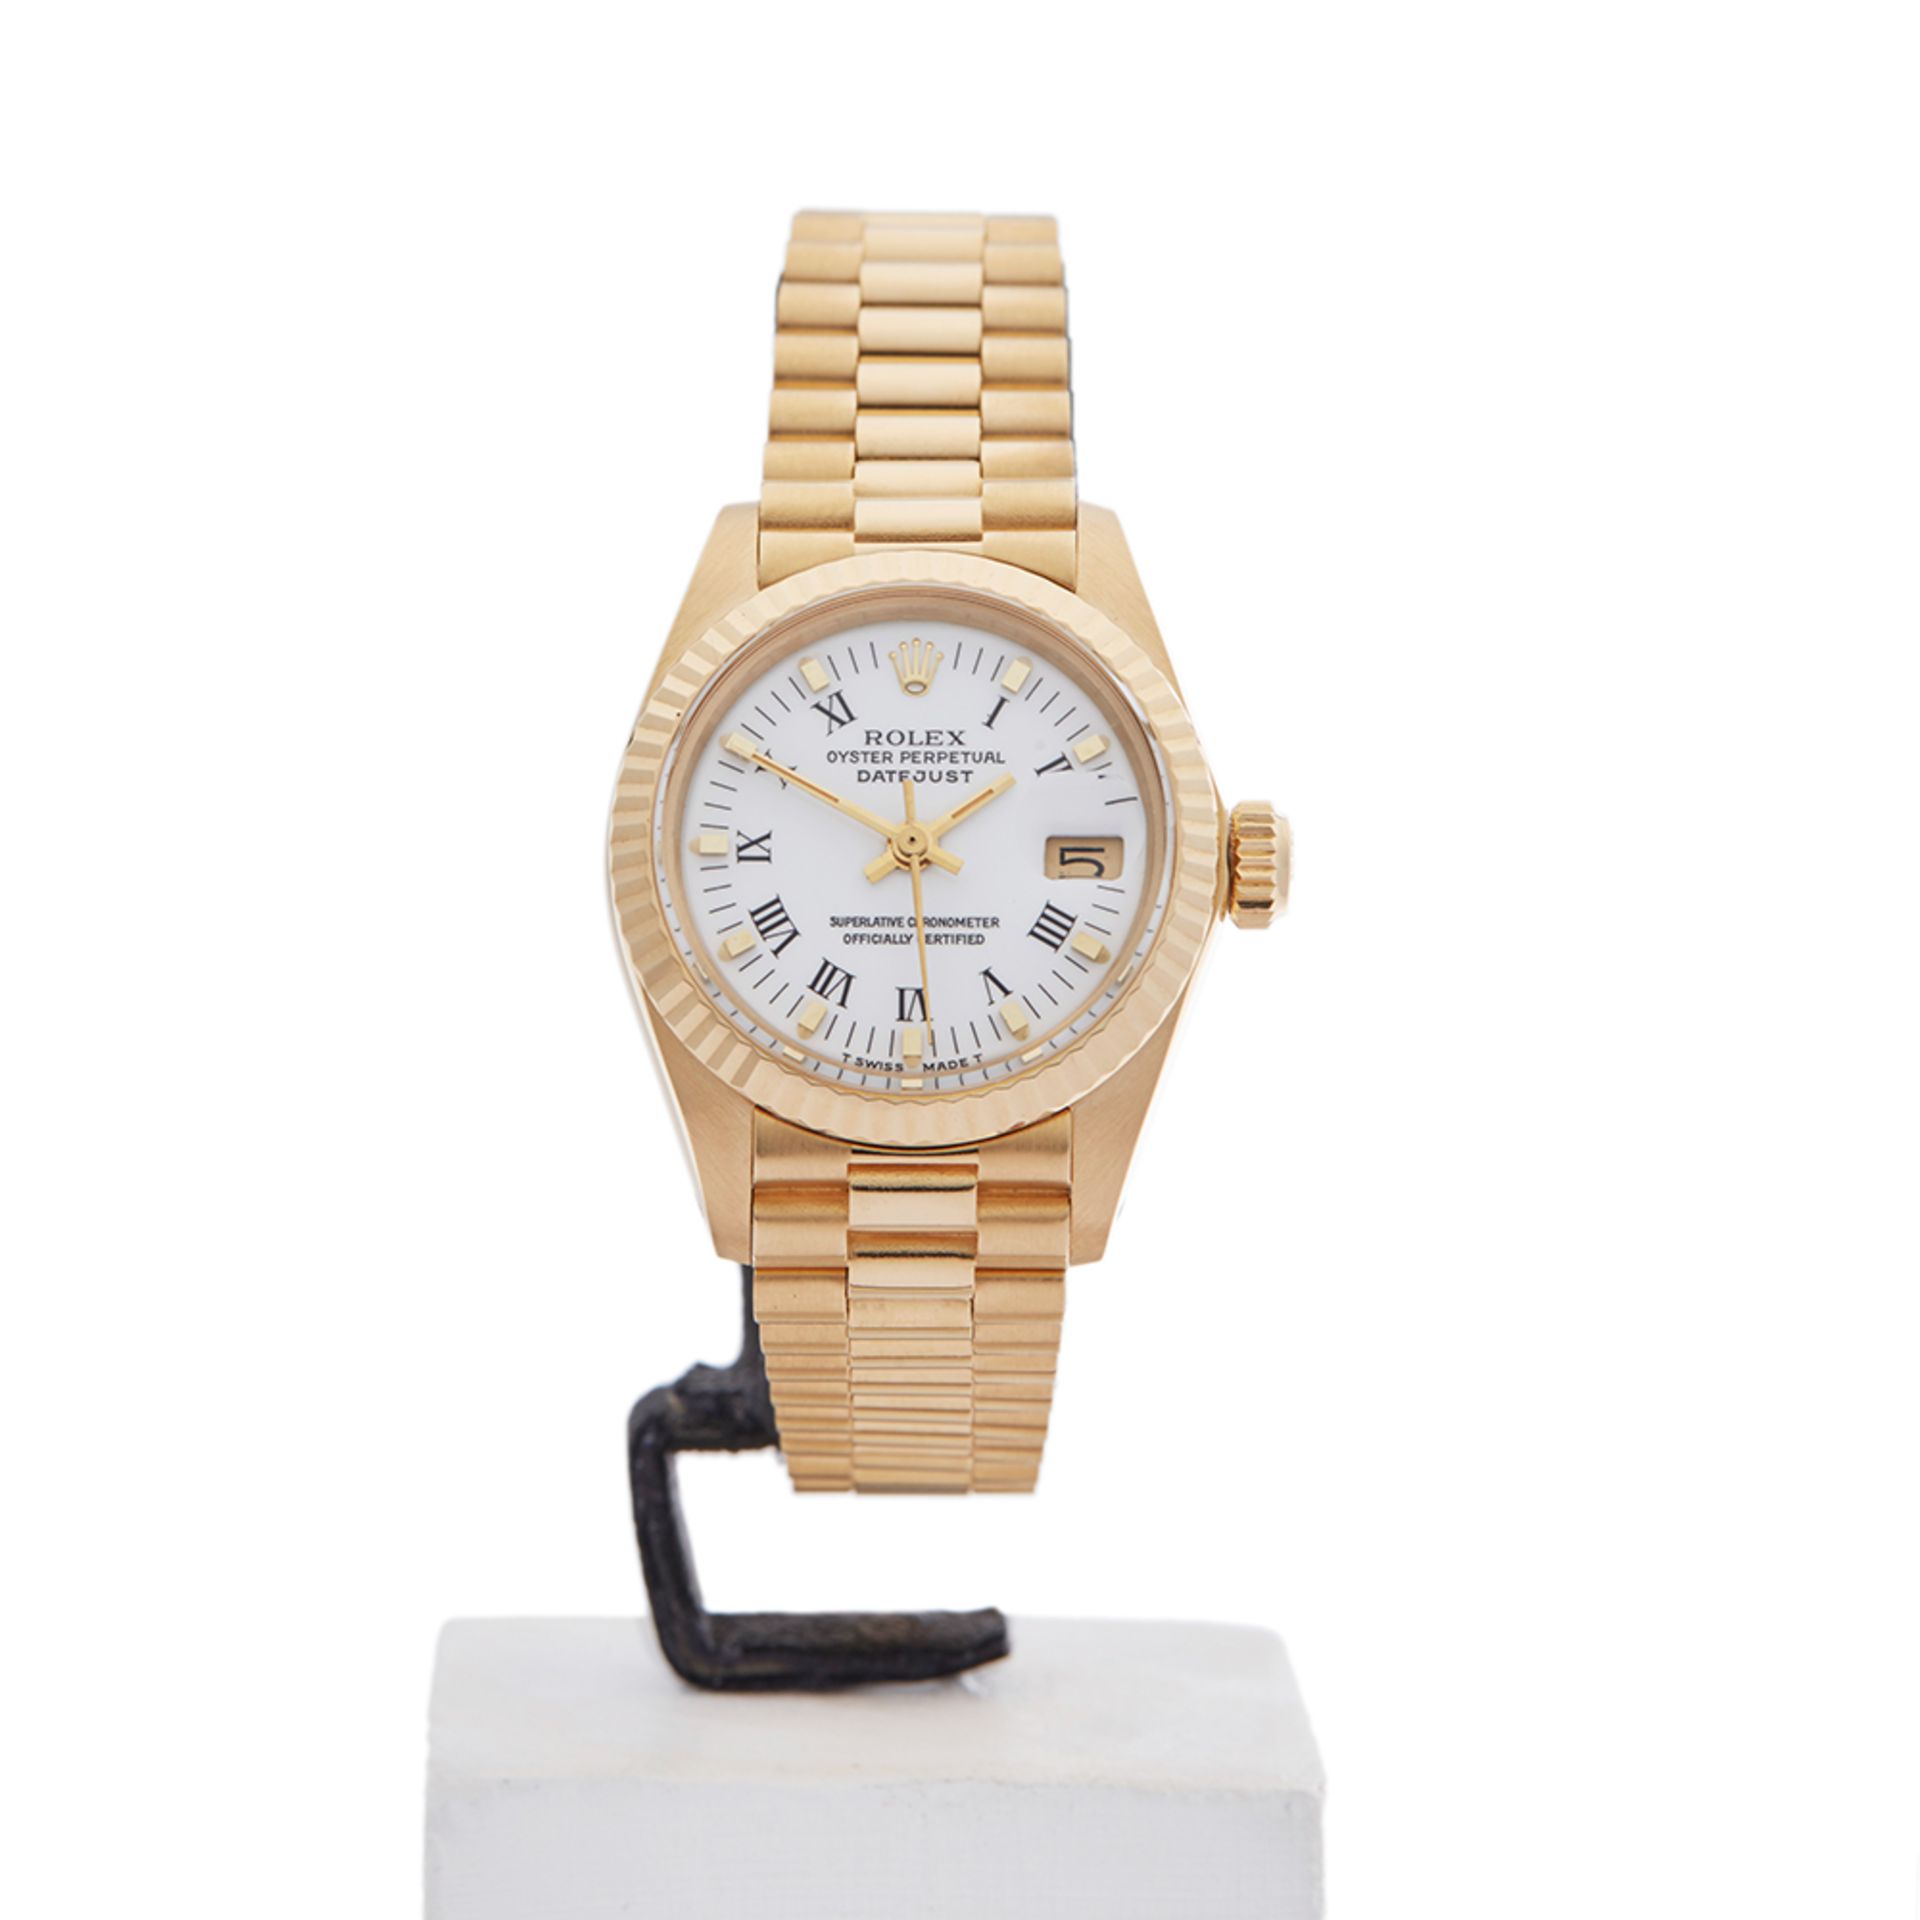 Rolex Datejust 26mm 18k Yellow Gold 6917 - Image 2 of 9